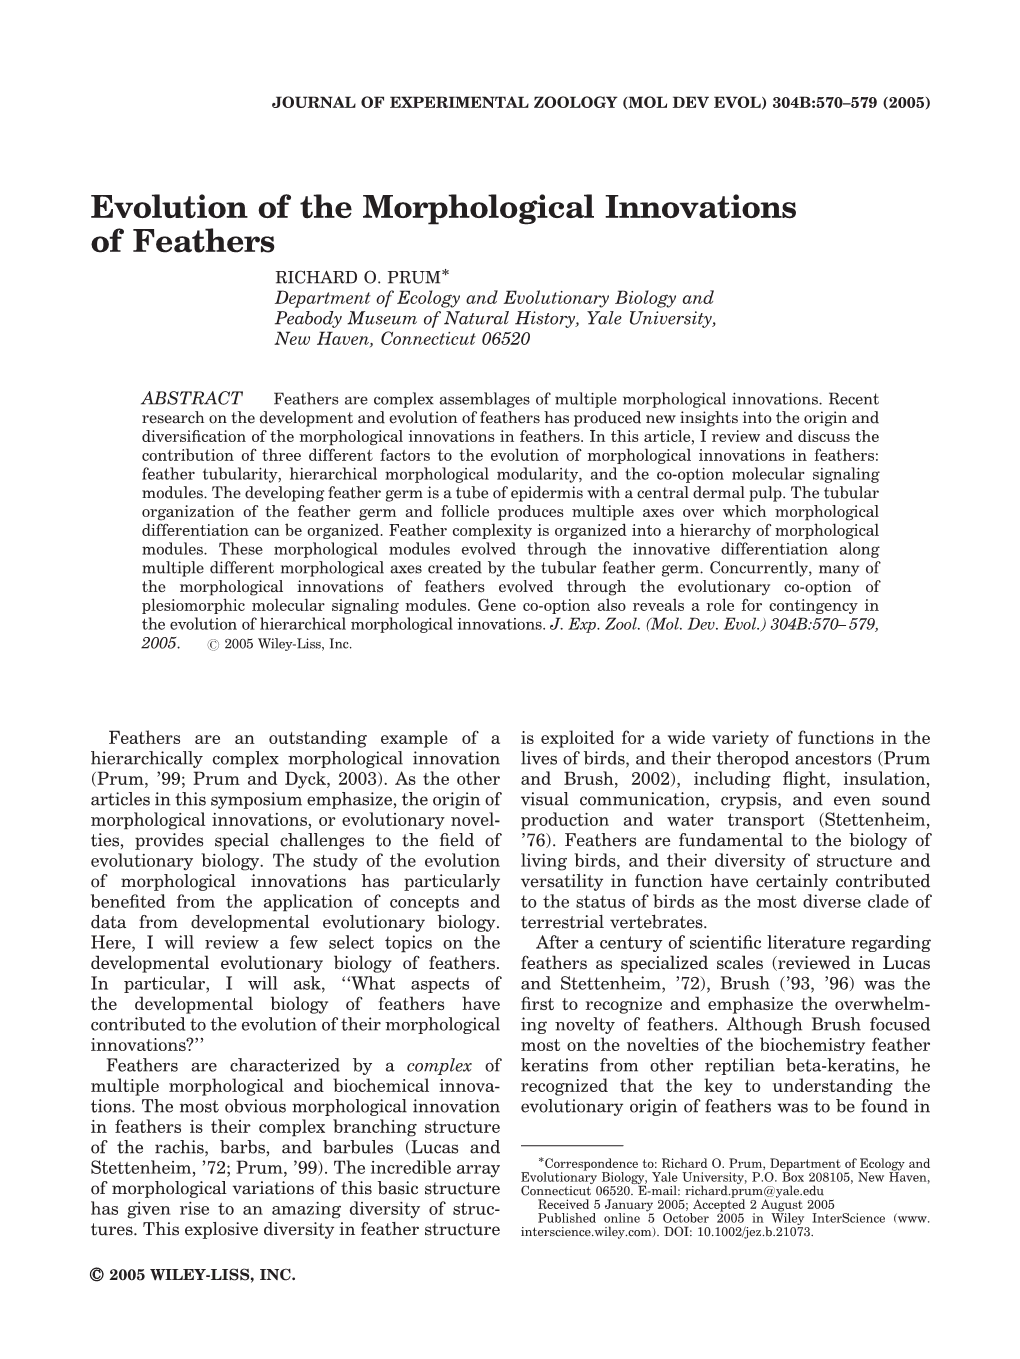 Evolution of the Morphological Innovations of Feathers RICHARD O